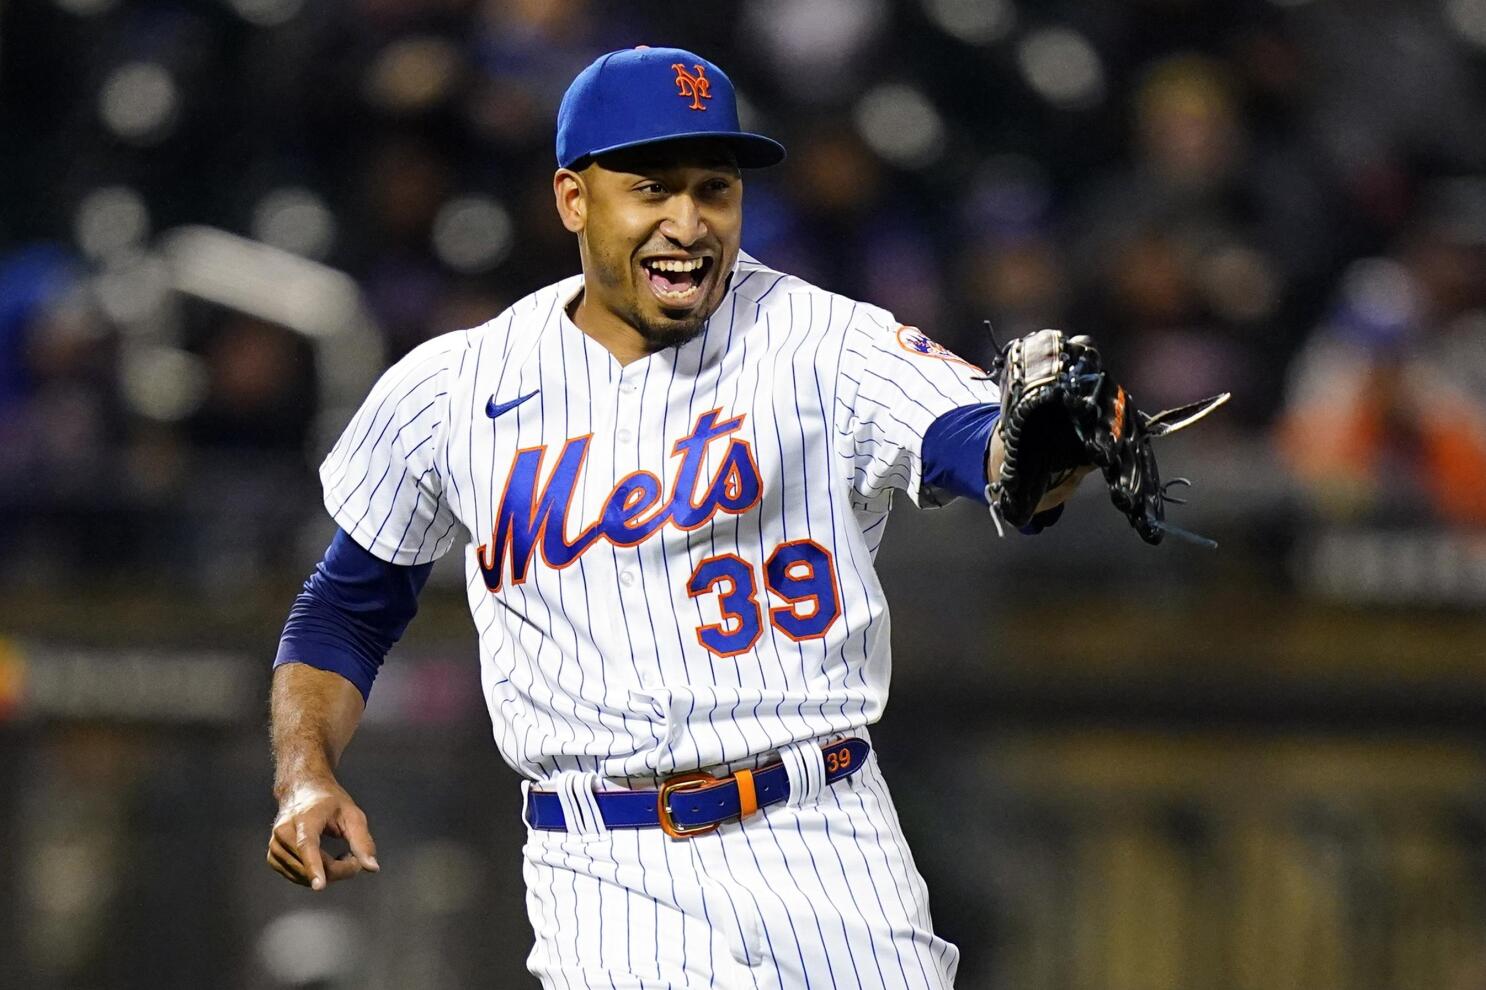 The New York Mets need cover for Edwin Diaz and could look to his